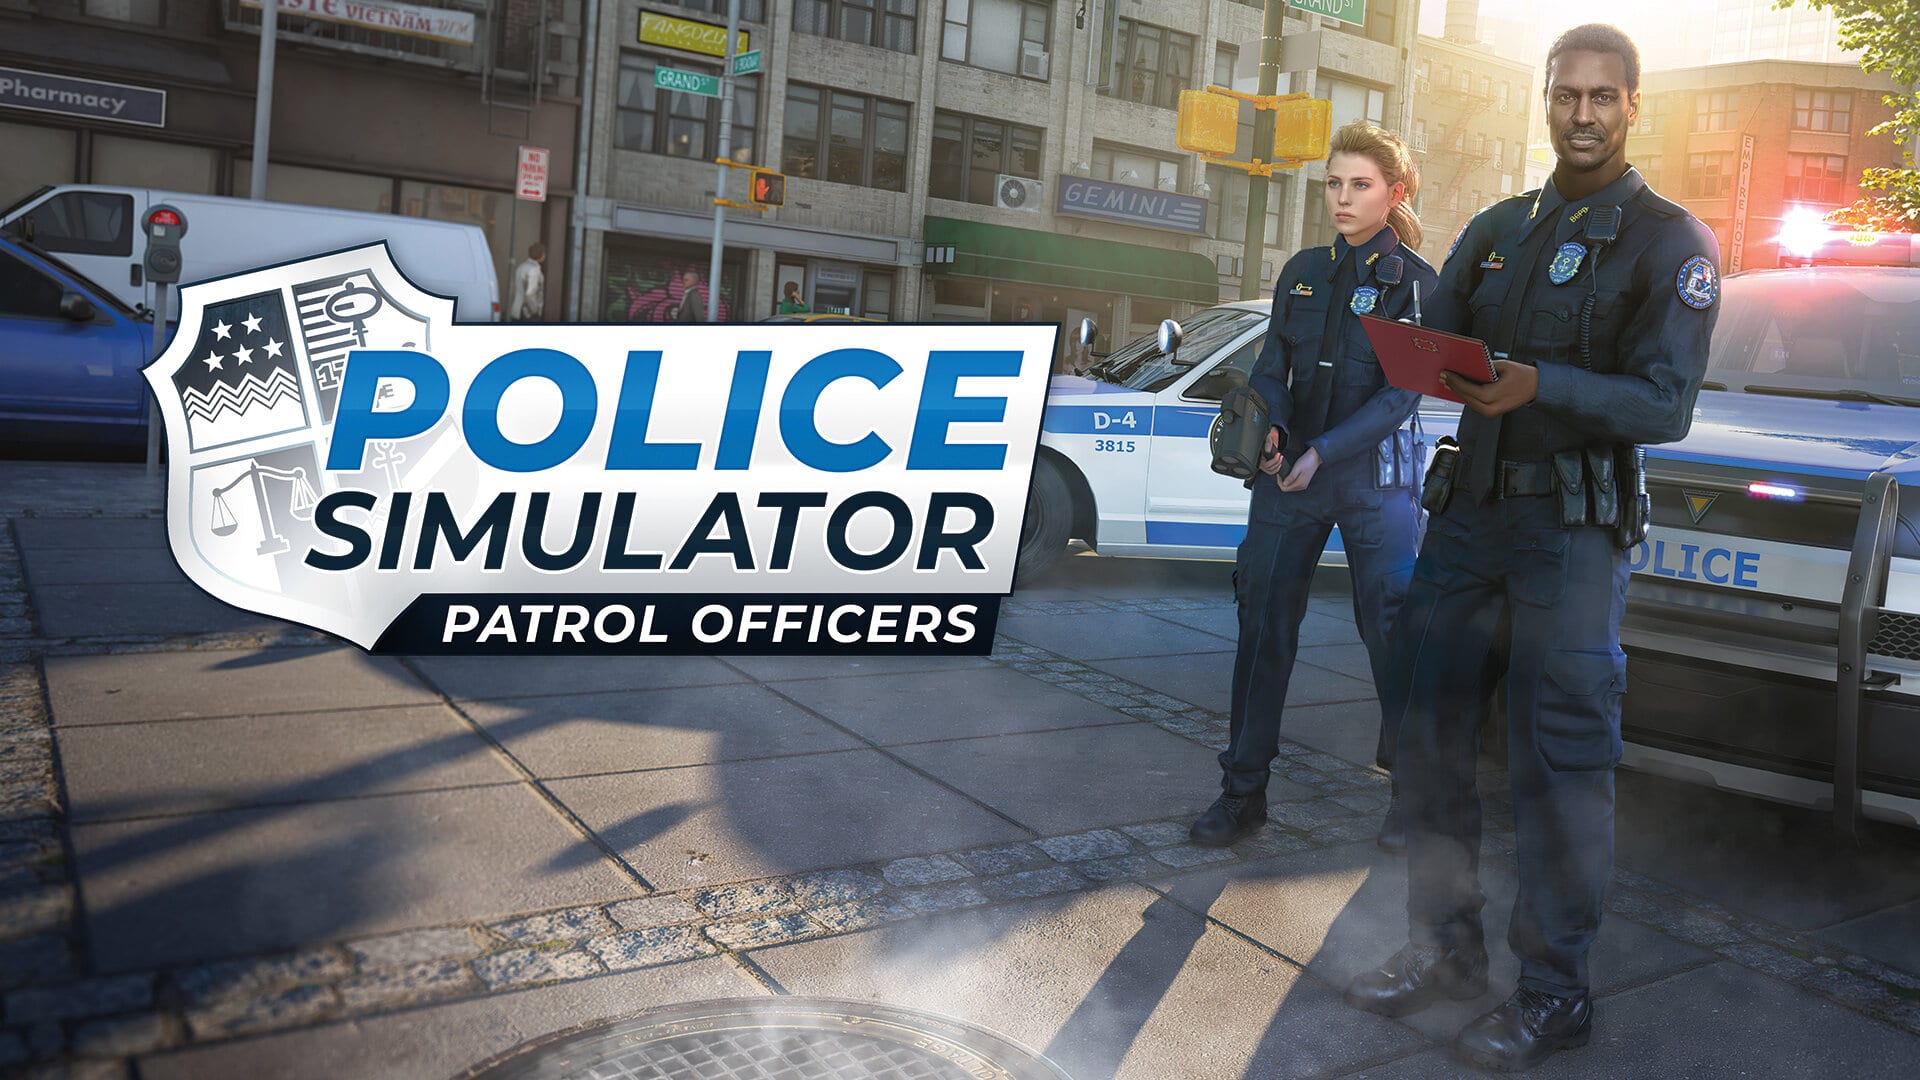 Police Simulator: Patrol Officers Console Versions to Be Available "Soon," New Trailer Released